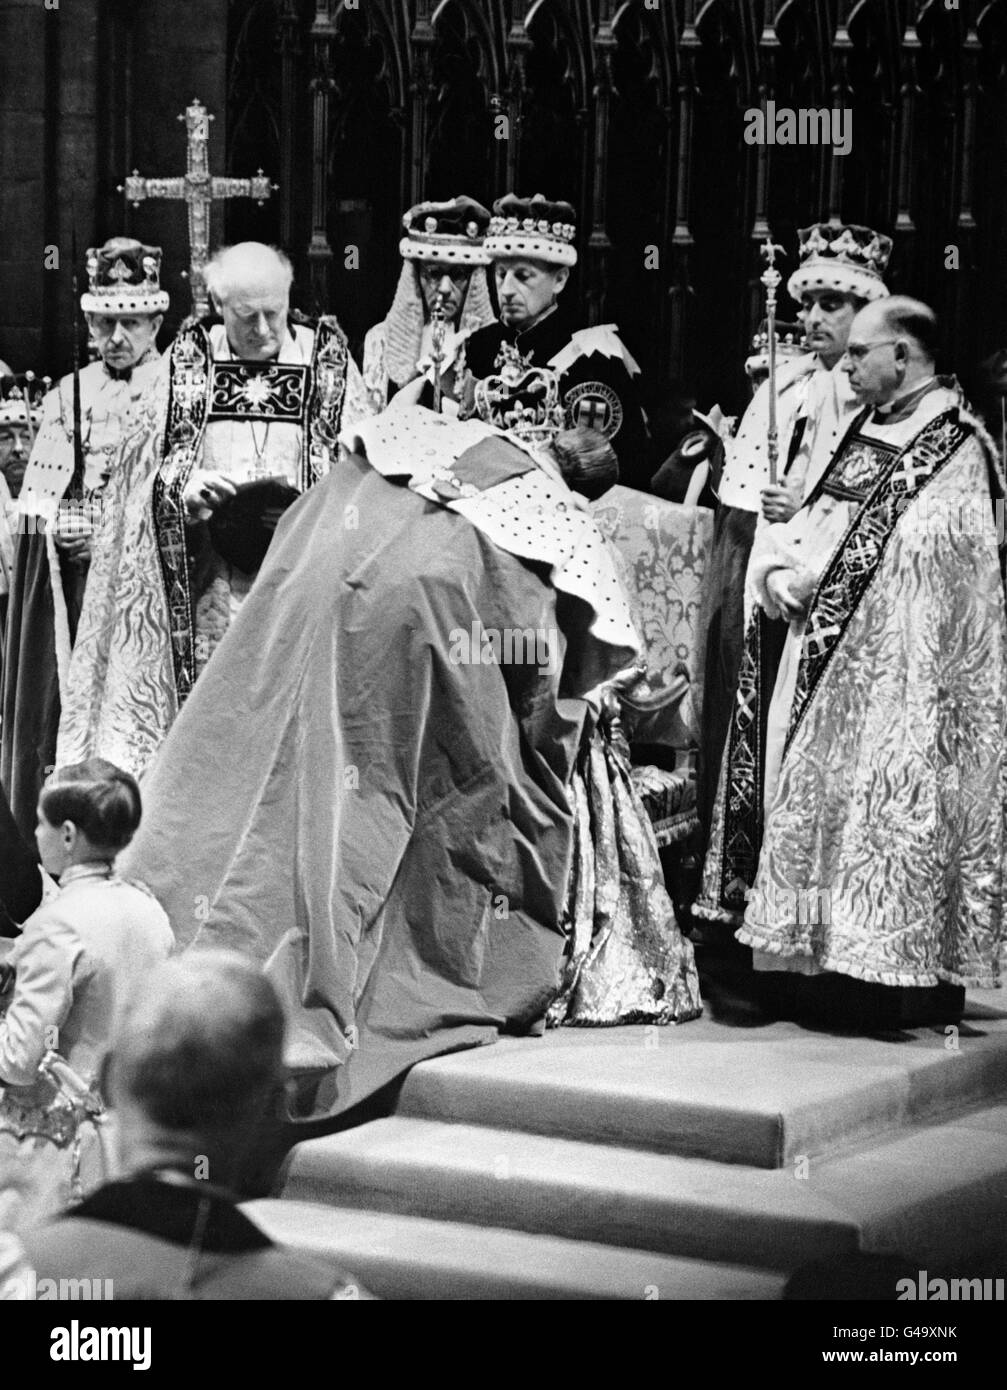 The Duke of Edinburgh paying homage to the Queen during her Coronation in Westminster Abbey Stock Photo